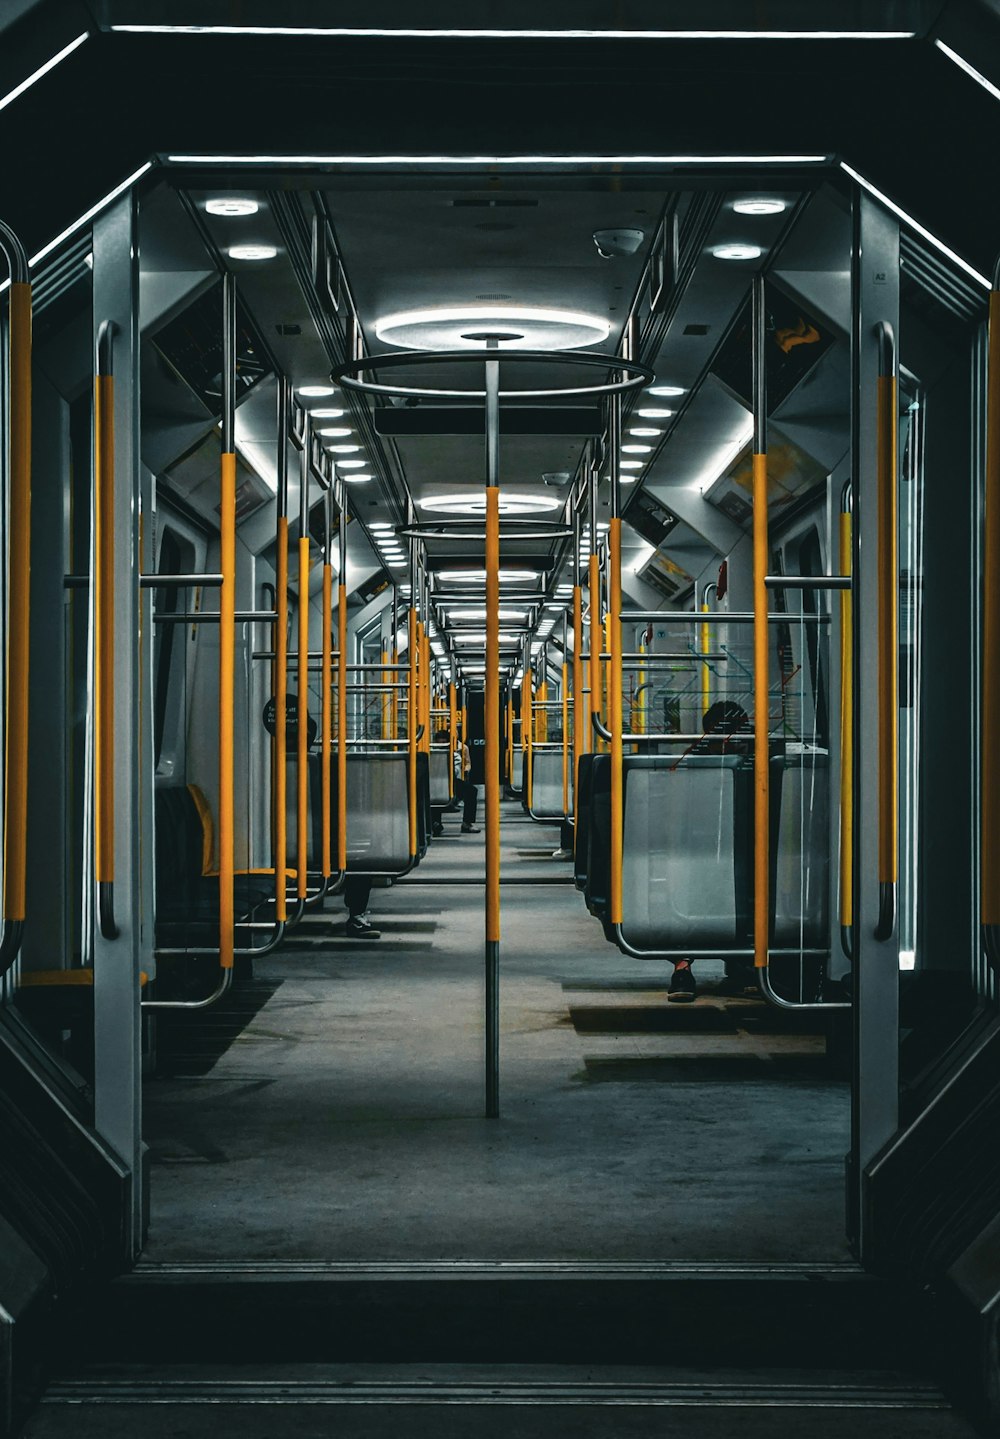 an empty subway car with yellow and black accents